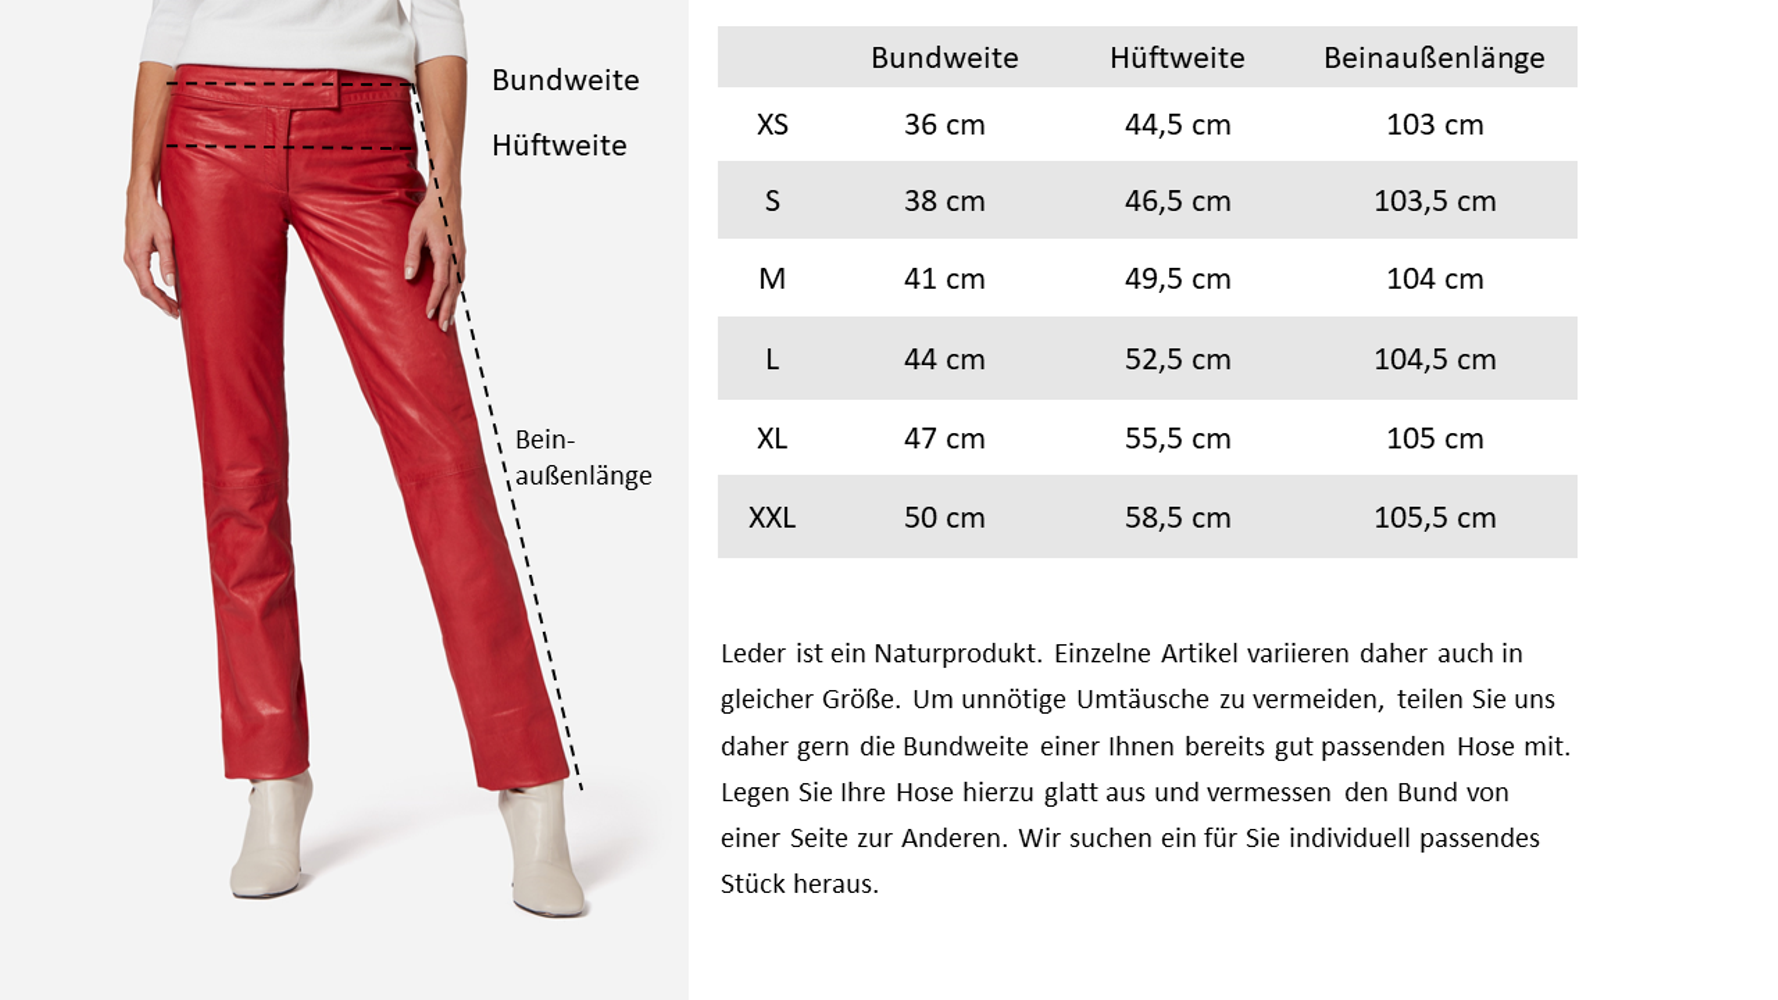 Ladies leather pants low cut, red in 2 colors, Bild 7